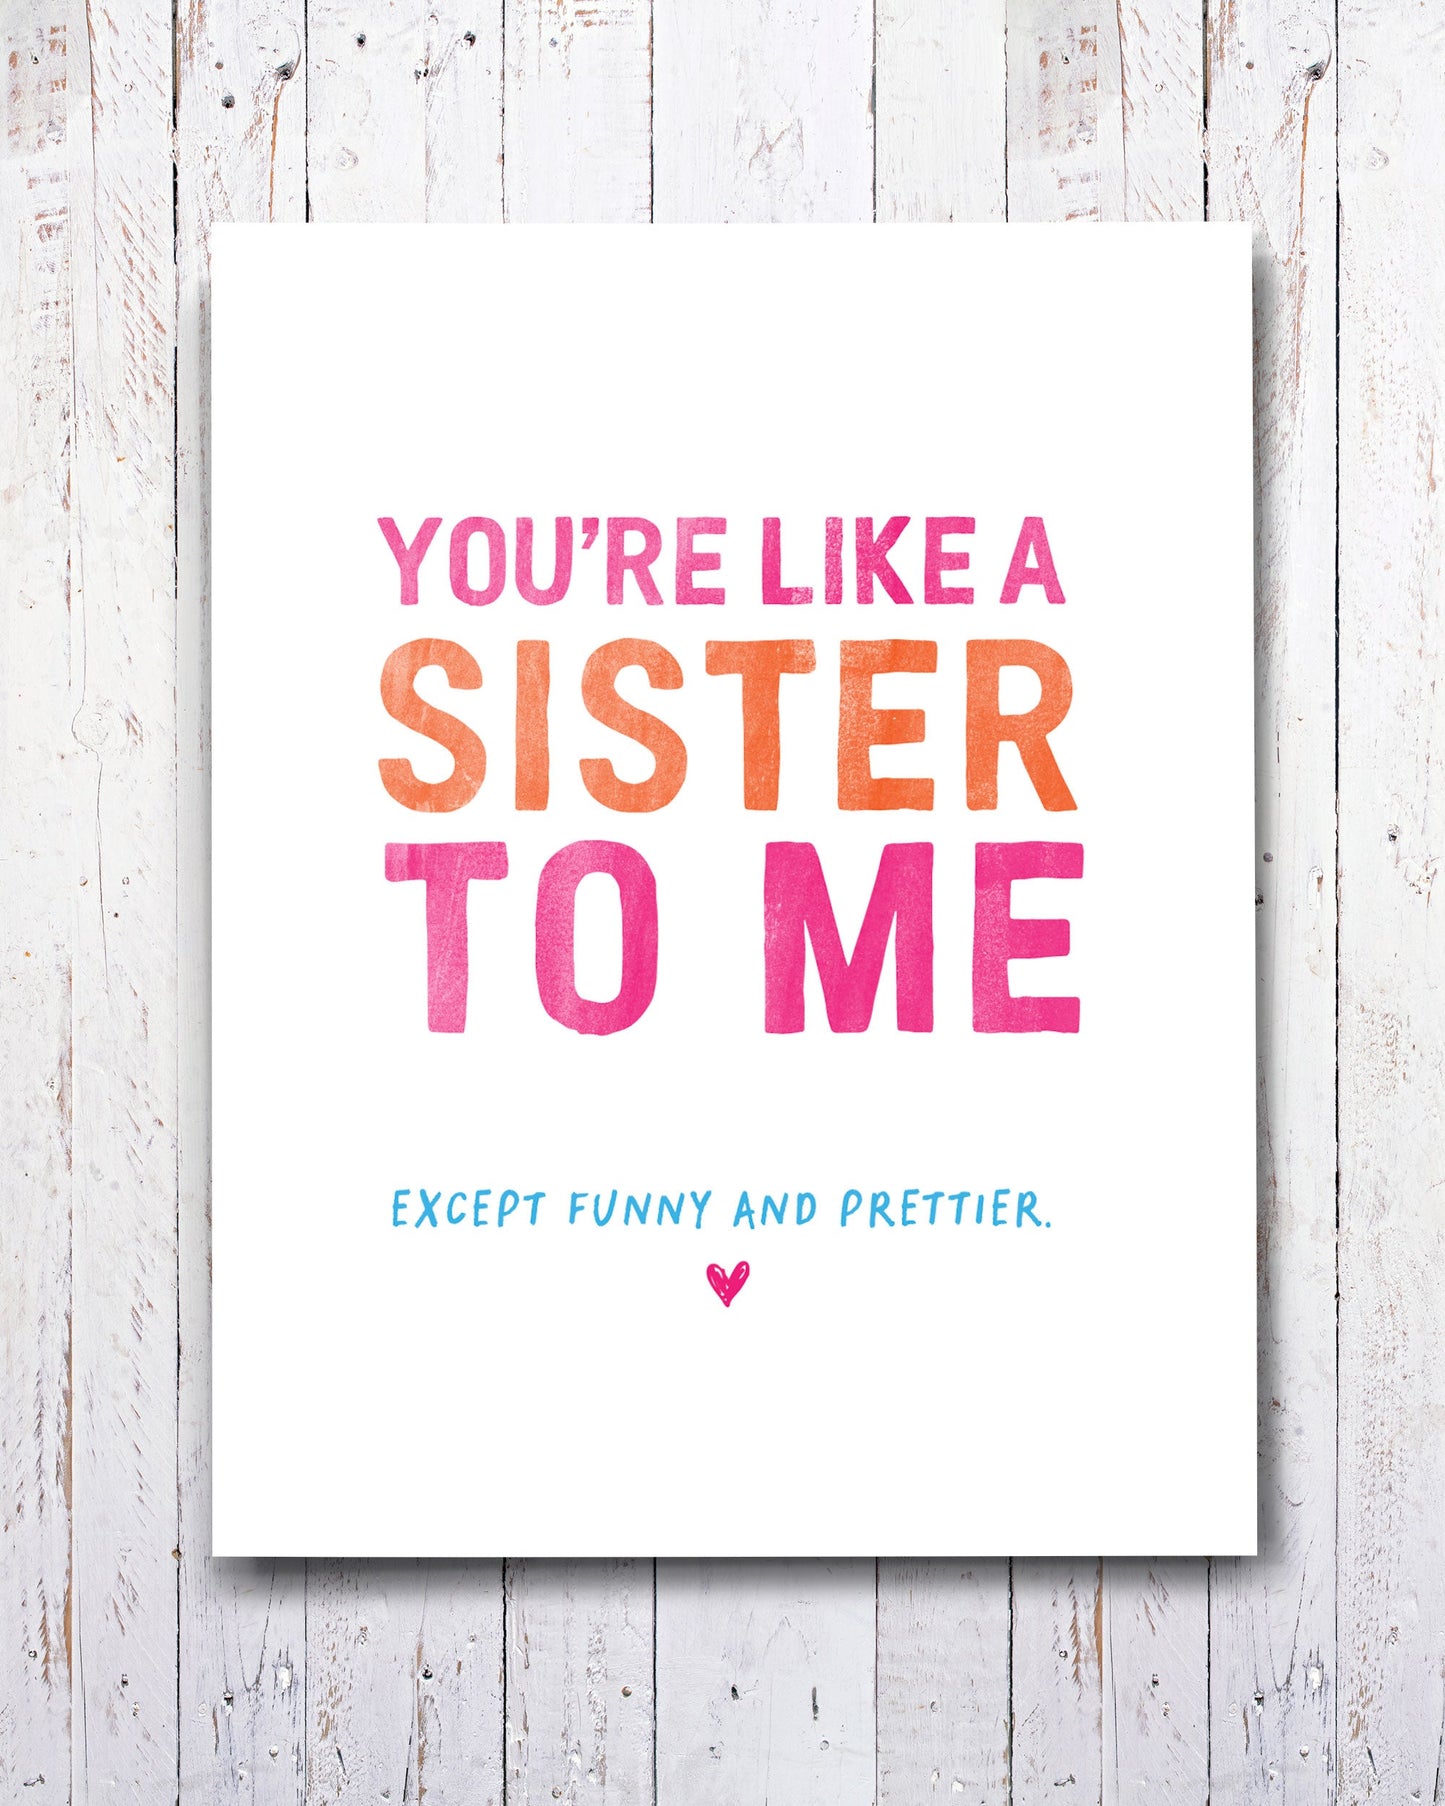 You’re Like a Sister to Me, Funny Greeting Card - Transit Design - Smirkantile